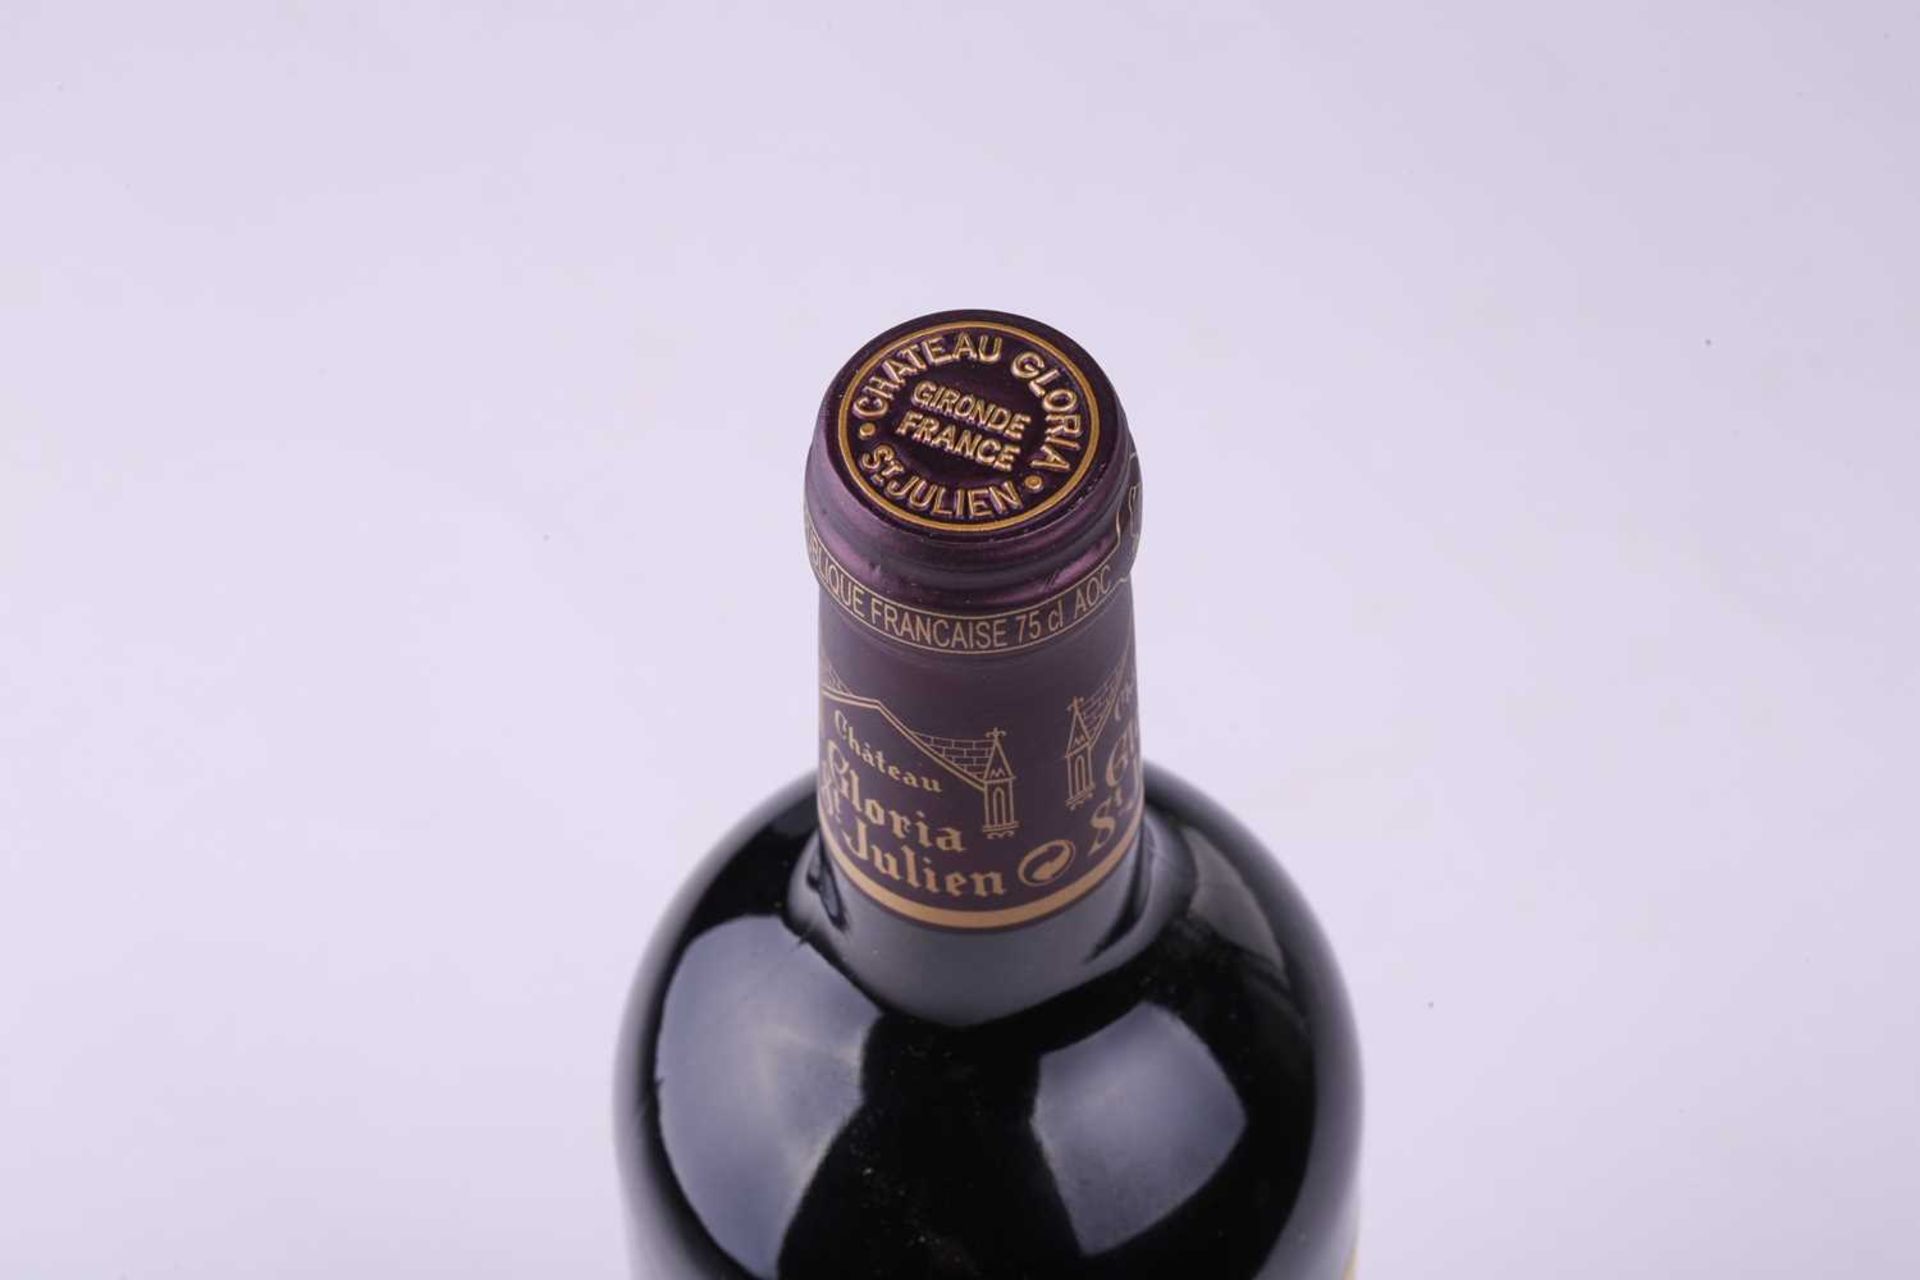 Six bottles of Chateau Gloria St Julien Bordeaux, 2011, OWCPrivate collector in London Unopened - Image 20 of 21